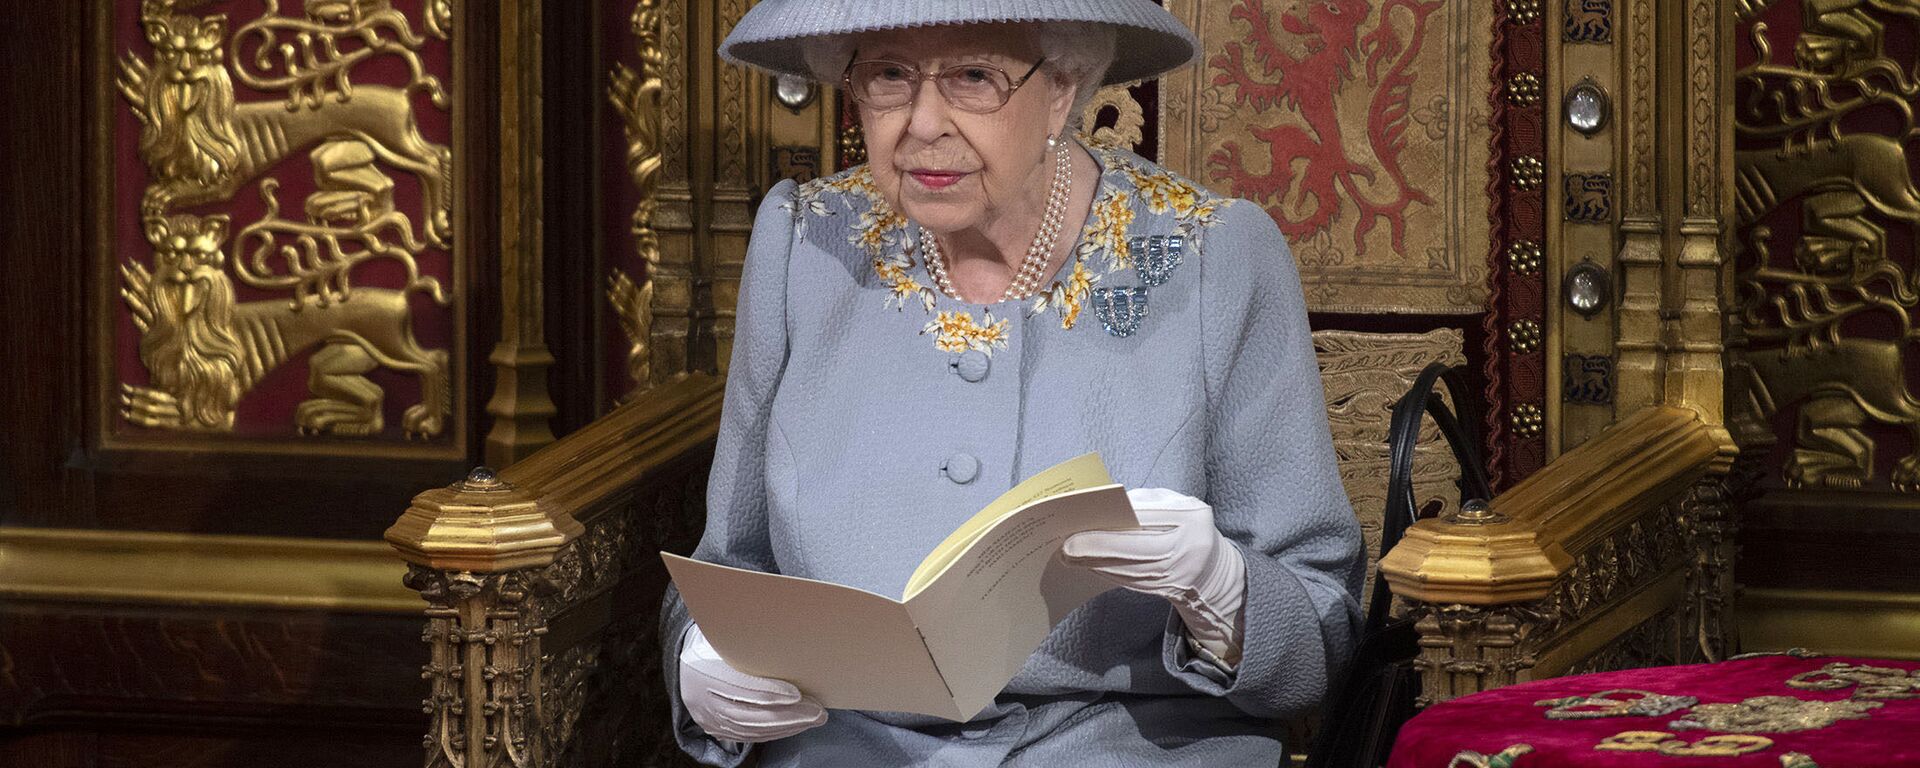 Britain's Queen Elizabeth II delivers the speech in the House of Lords during the State Opening of Parliament at the Palace of Westminster in London, Tuesday May 11, 2021. (Eddie Mulholland/Pool via AP) - Sputnik International, 1920, 11.05.2021